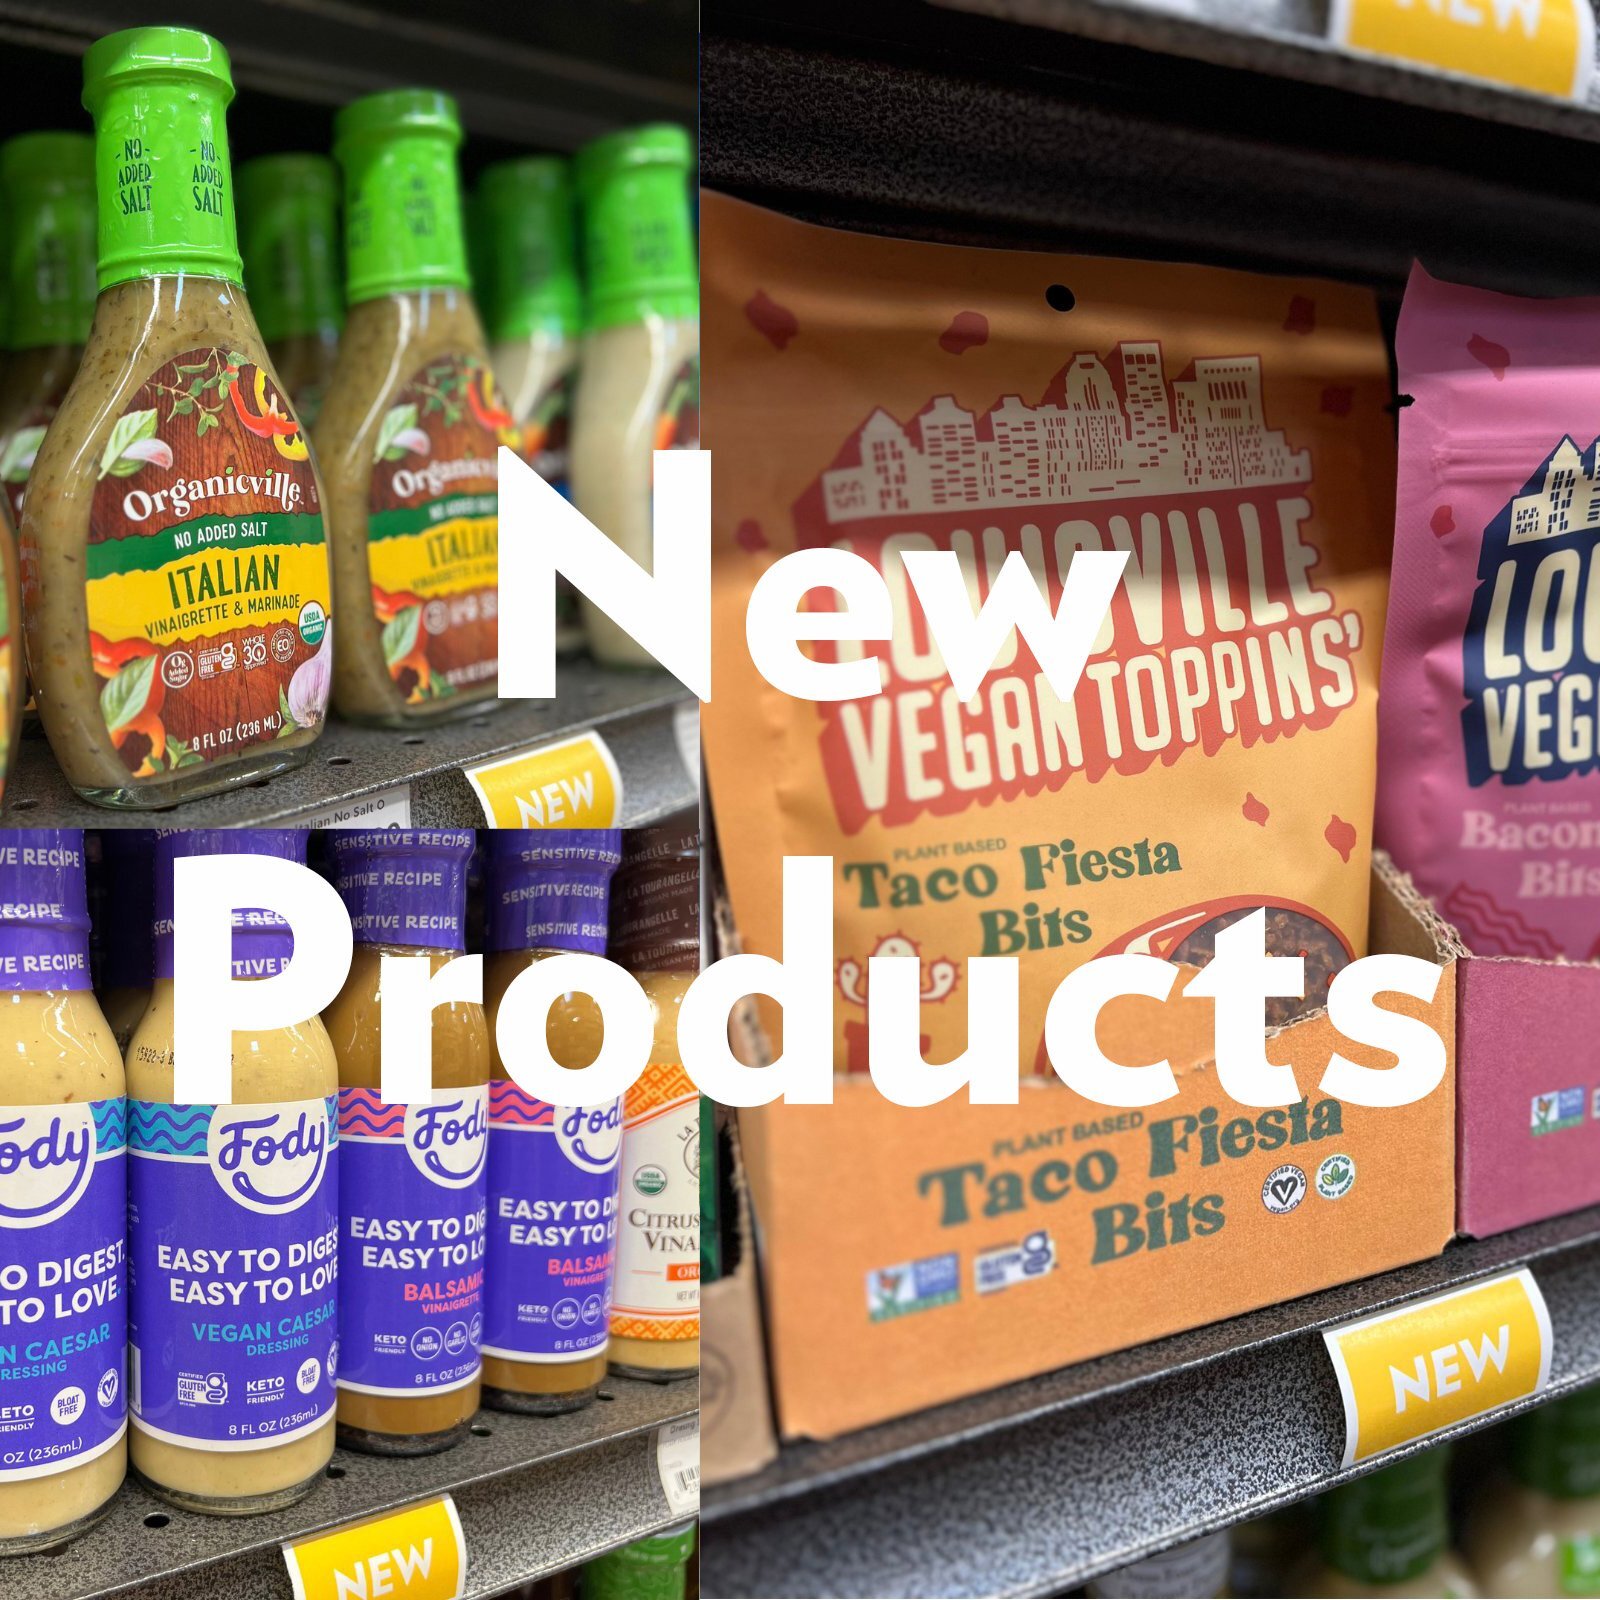 New Product Alert!! We have a variety of salad related items, just in time for summer!! These products are from some new brands to the store and brand you already love. Stop in and try these tasty dressings today!